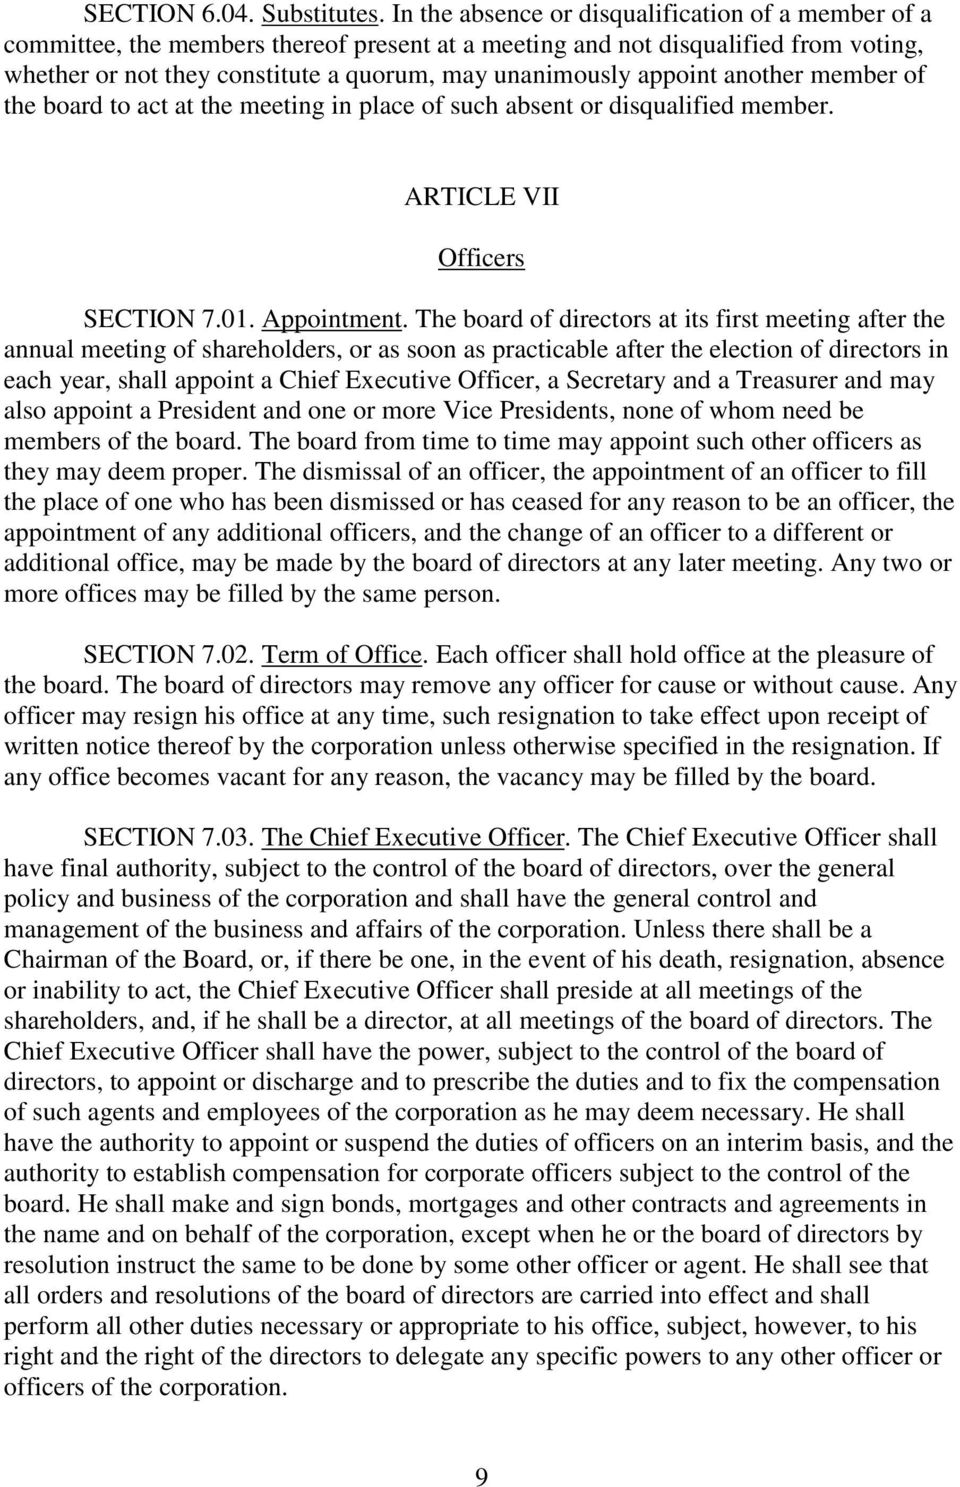 appoint another member of the board to act at the meeting in place of such absent or disqualified member. ARTICLE VII Officers SECTION 7.01. Appointment.